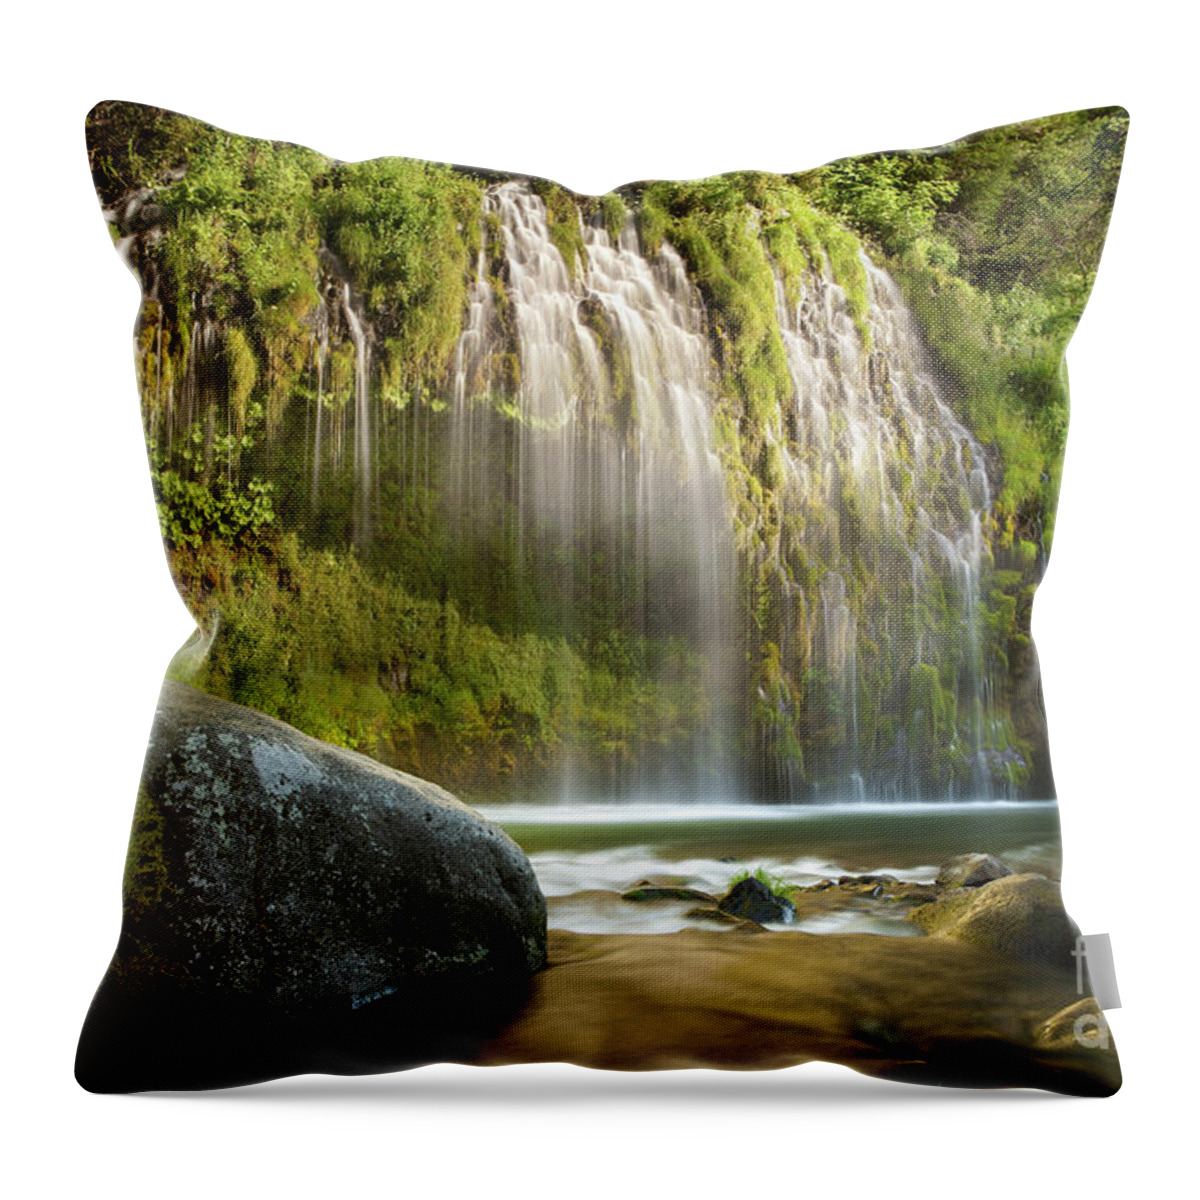 Water Photography Throw Pillow featuring the photograph Weeping Wall by Keith Kapple